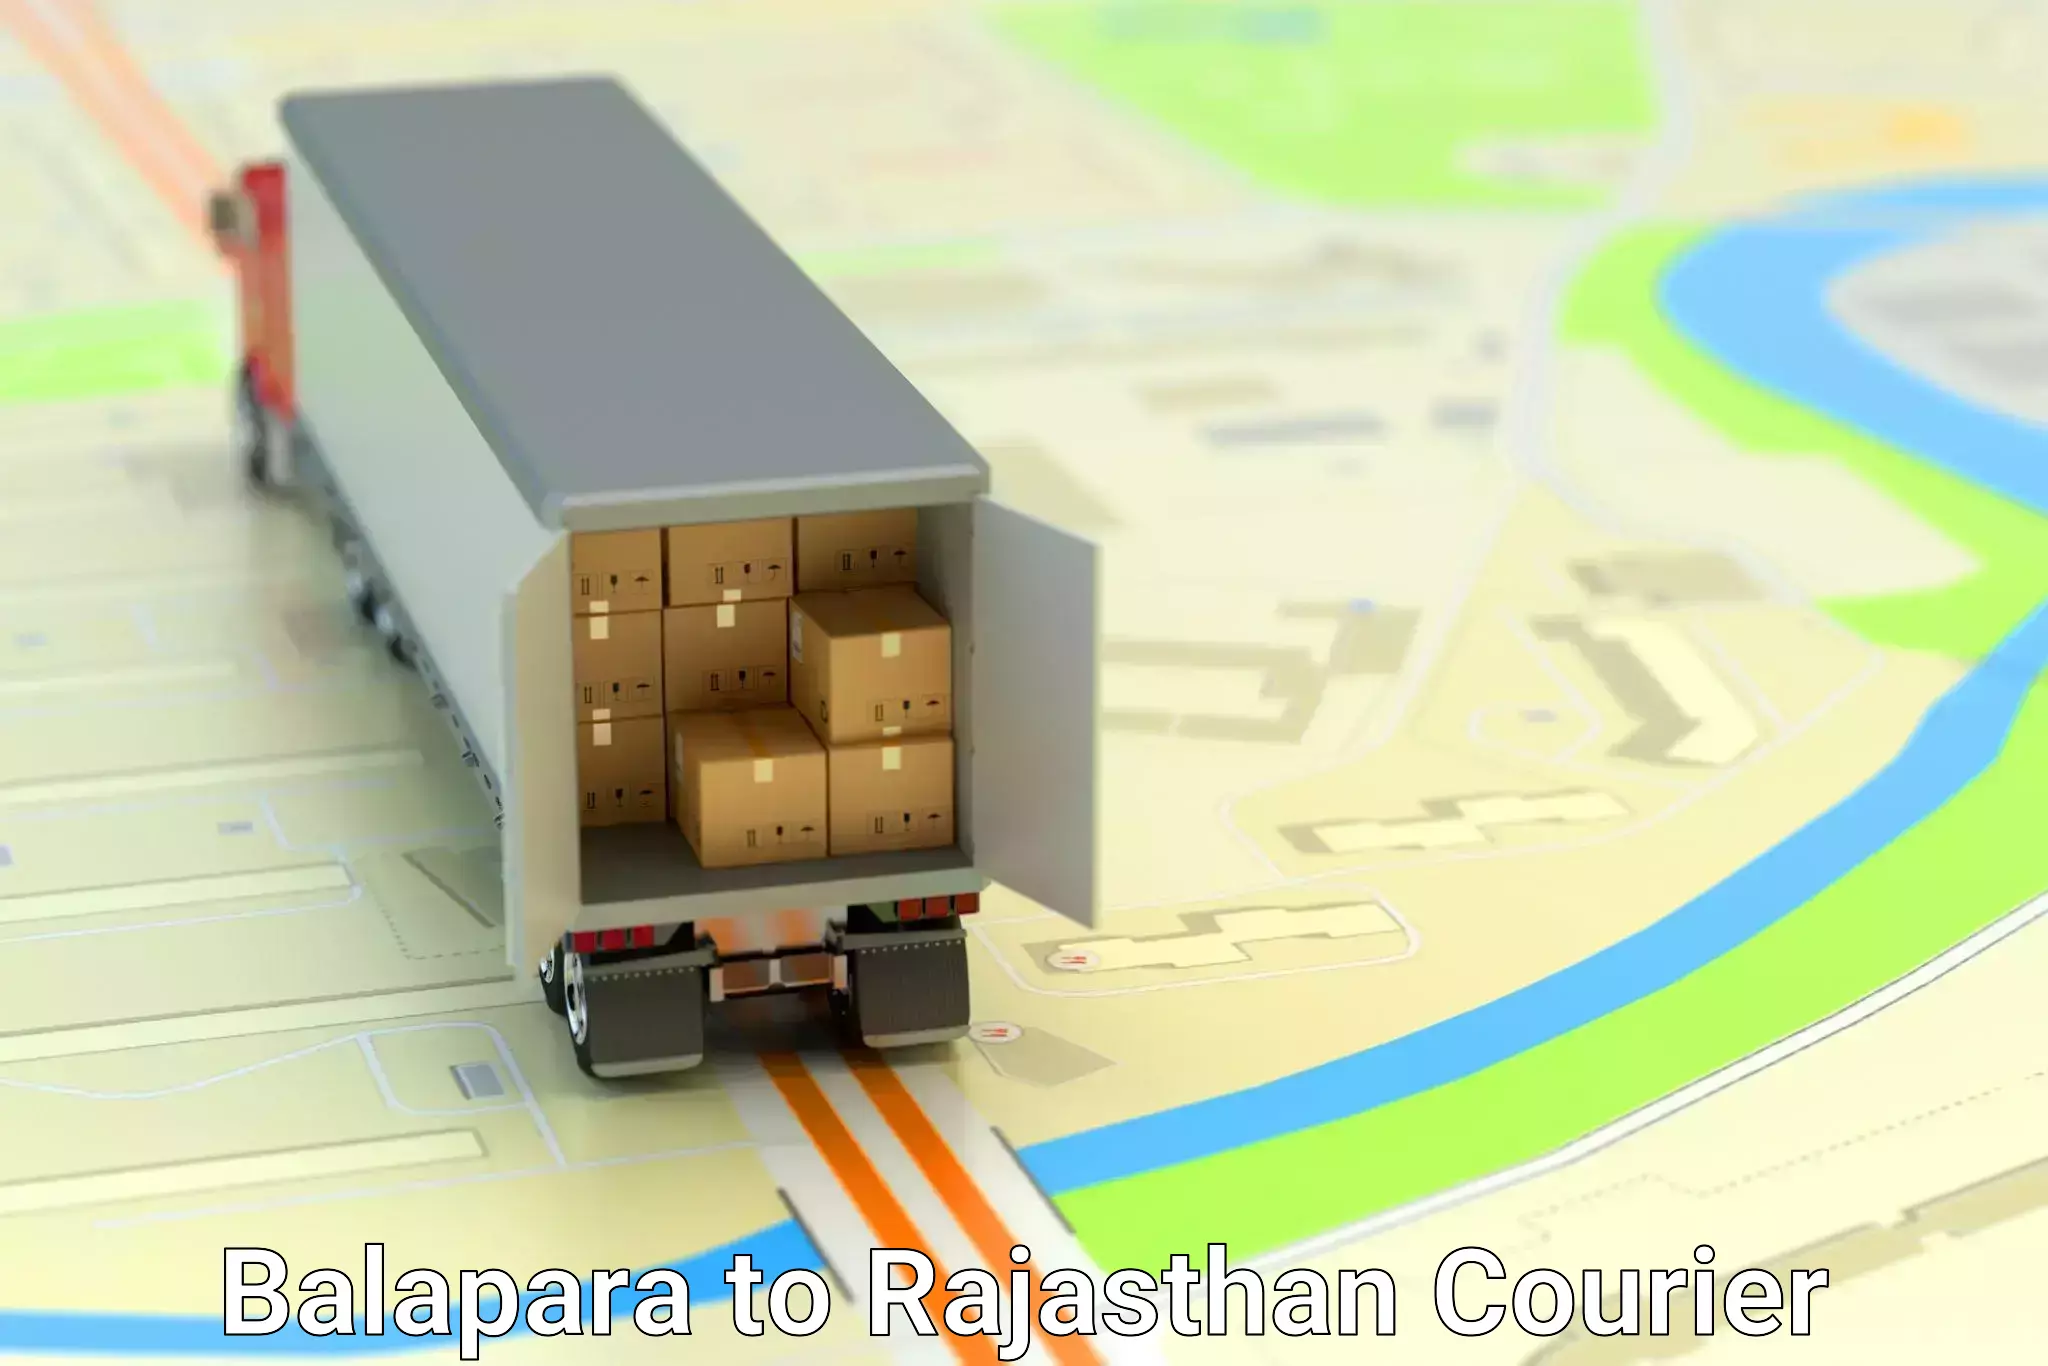 Global courier networks Balapara to Ghatol